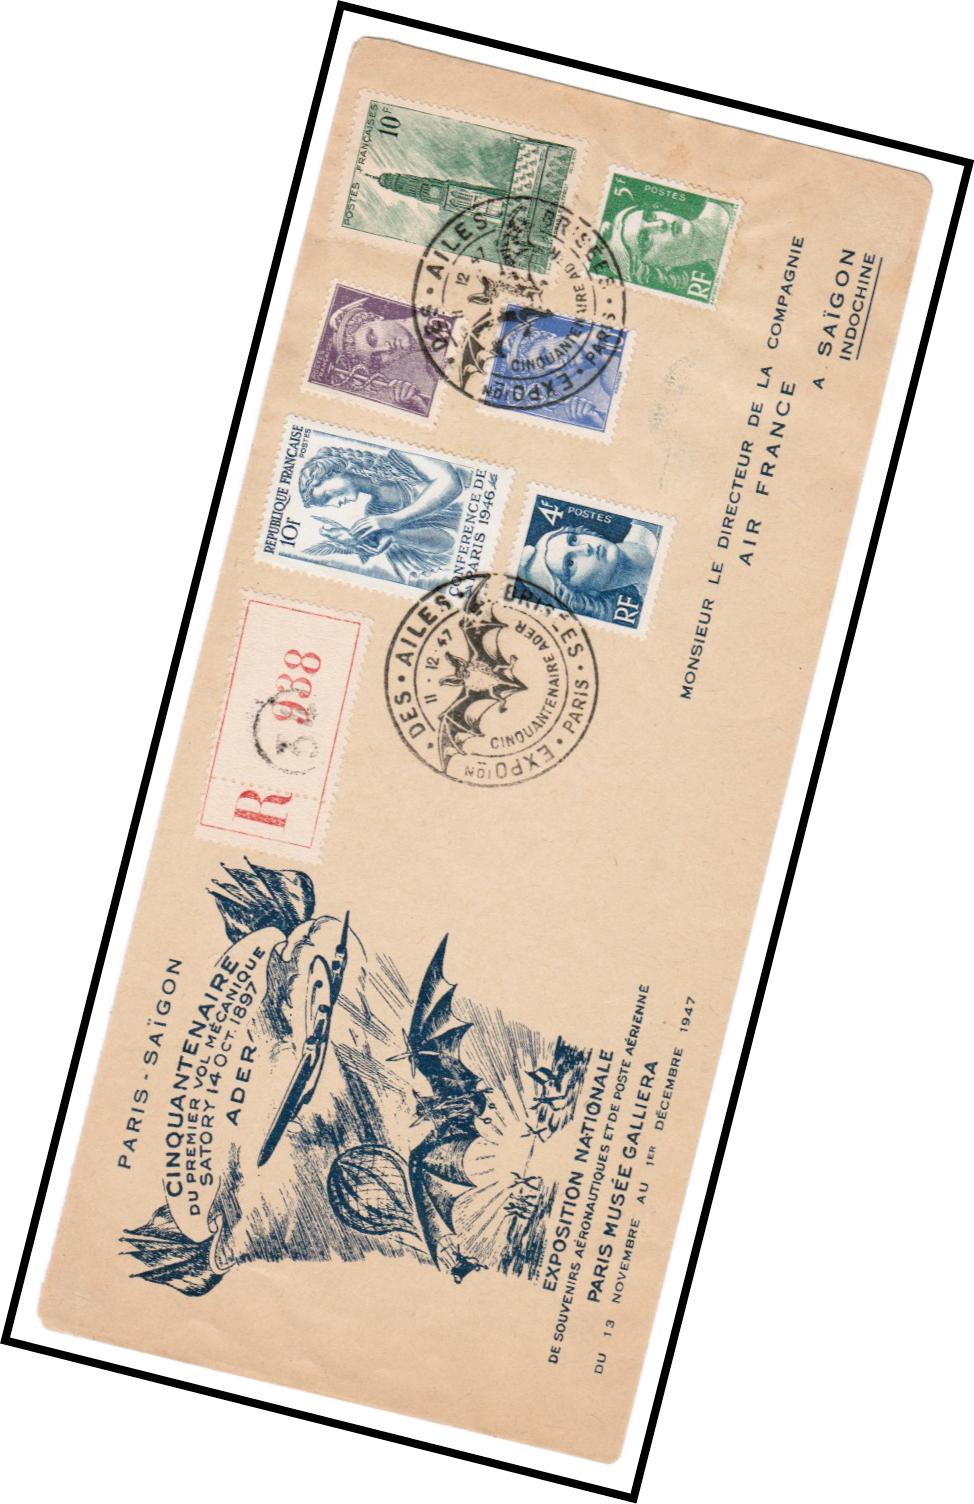 Paris Saigon December 1947 To celebrate the 50th anniversary of the claimed first mechanical flight, specially printed covers were